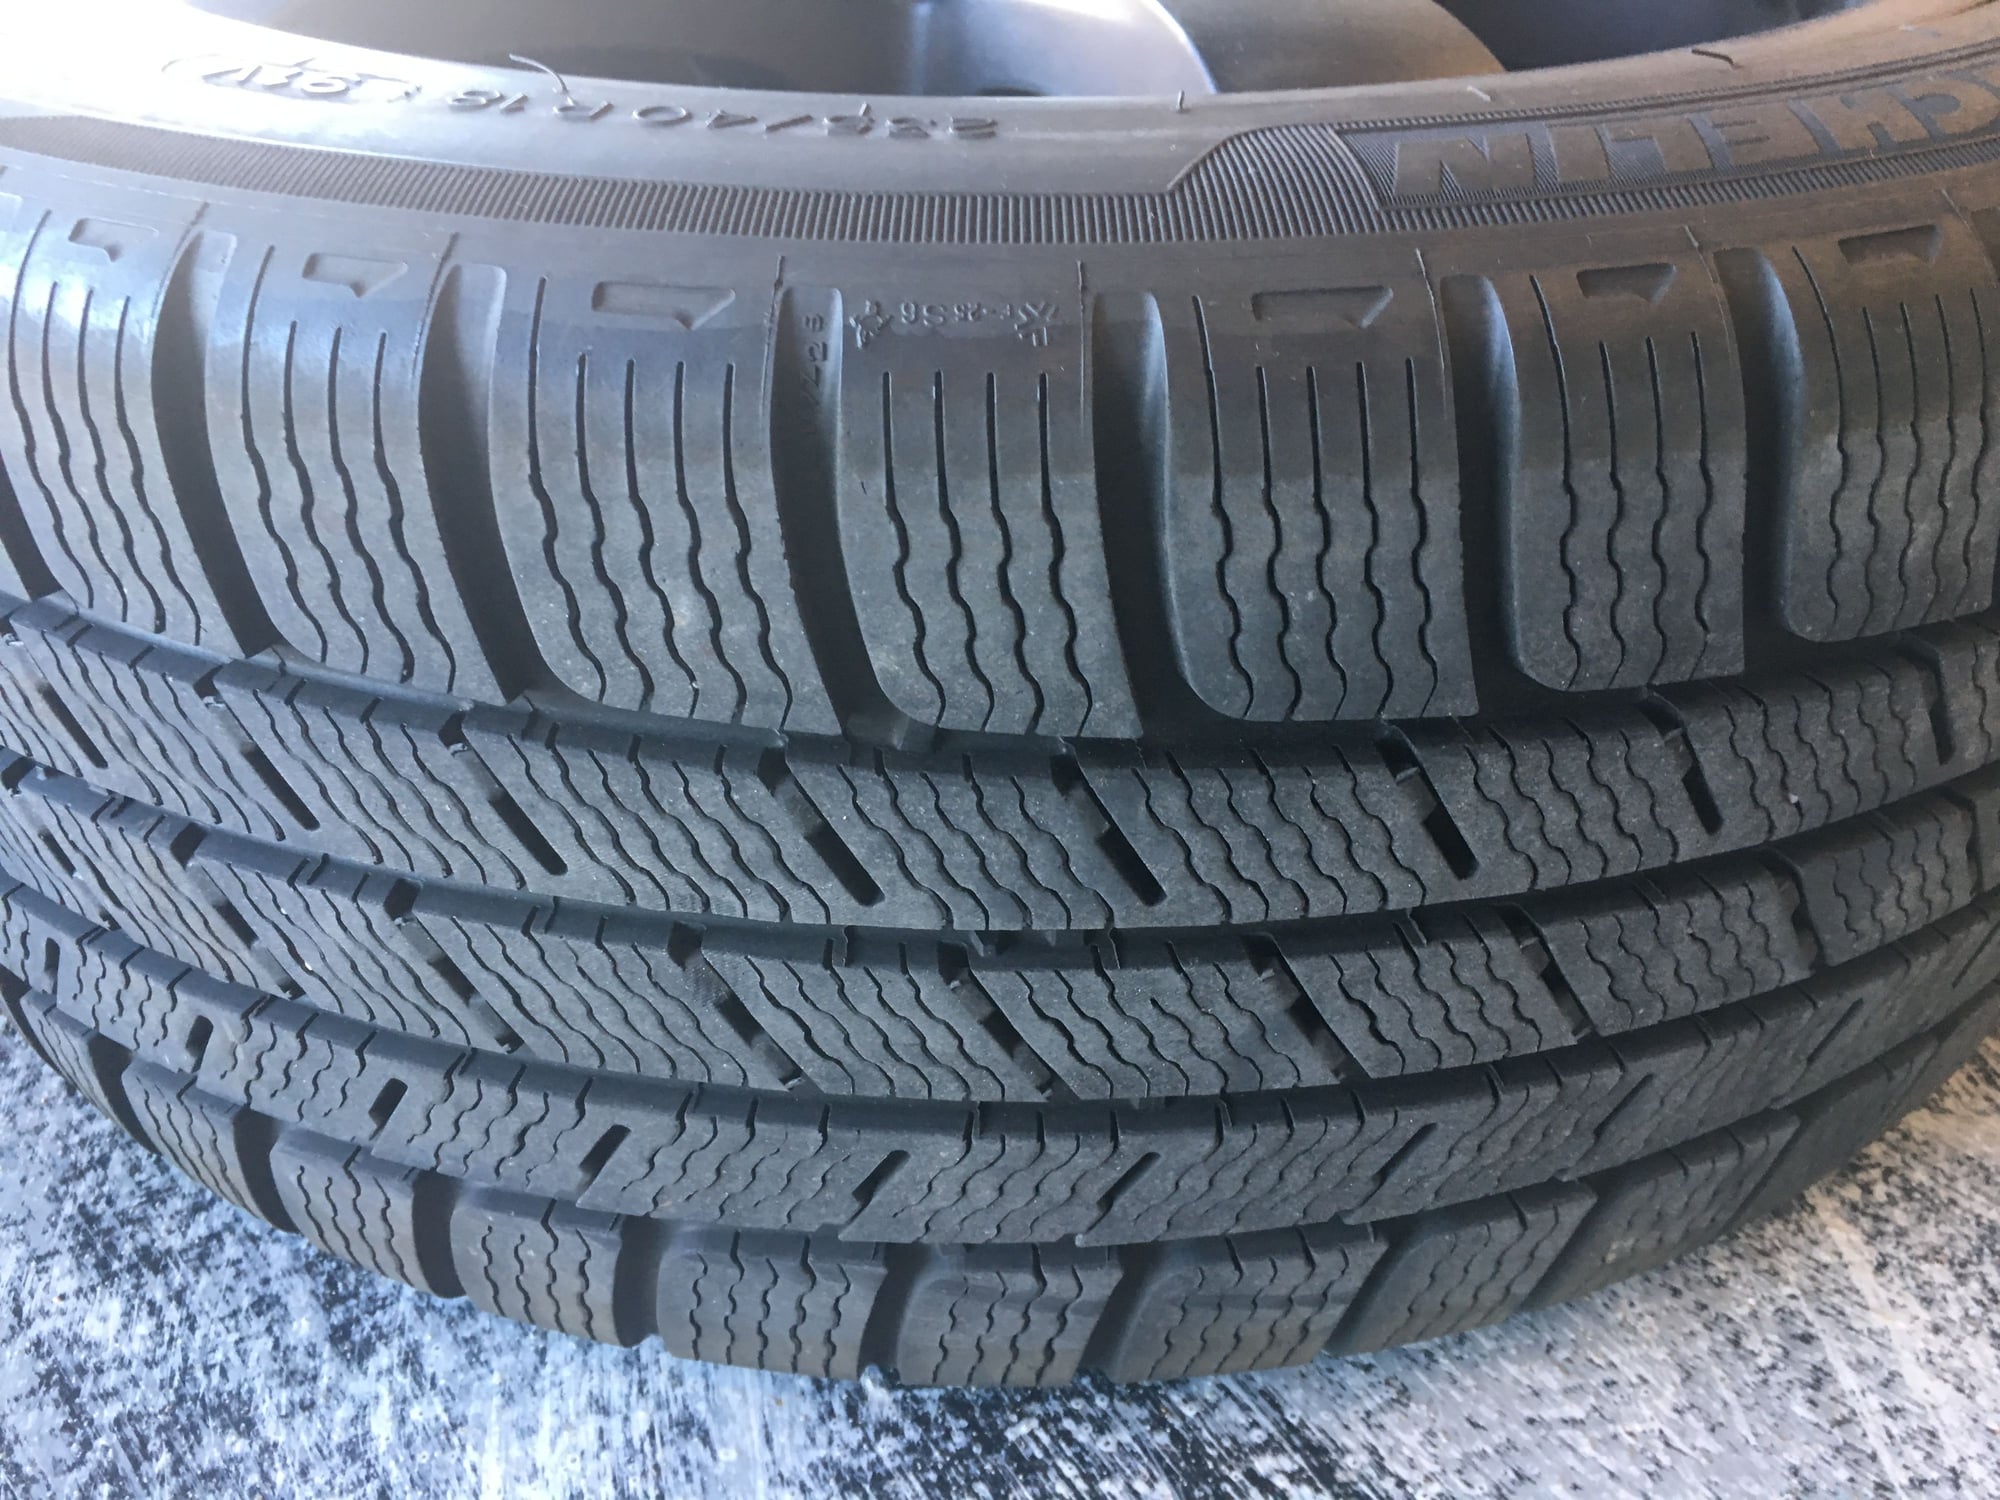 Wheels and Tires/Axles - Snow Tires/Rims 18" Michelin Pilot Alpins on Andros Spec P Rims from 2011 997.2 4S - Used - 2009 to 2012 Porsche 911 - Urbandale, IA 50323, United States